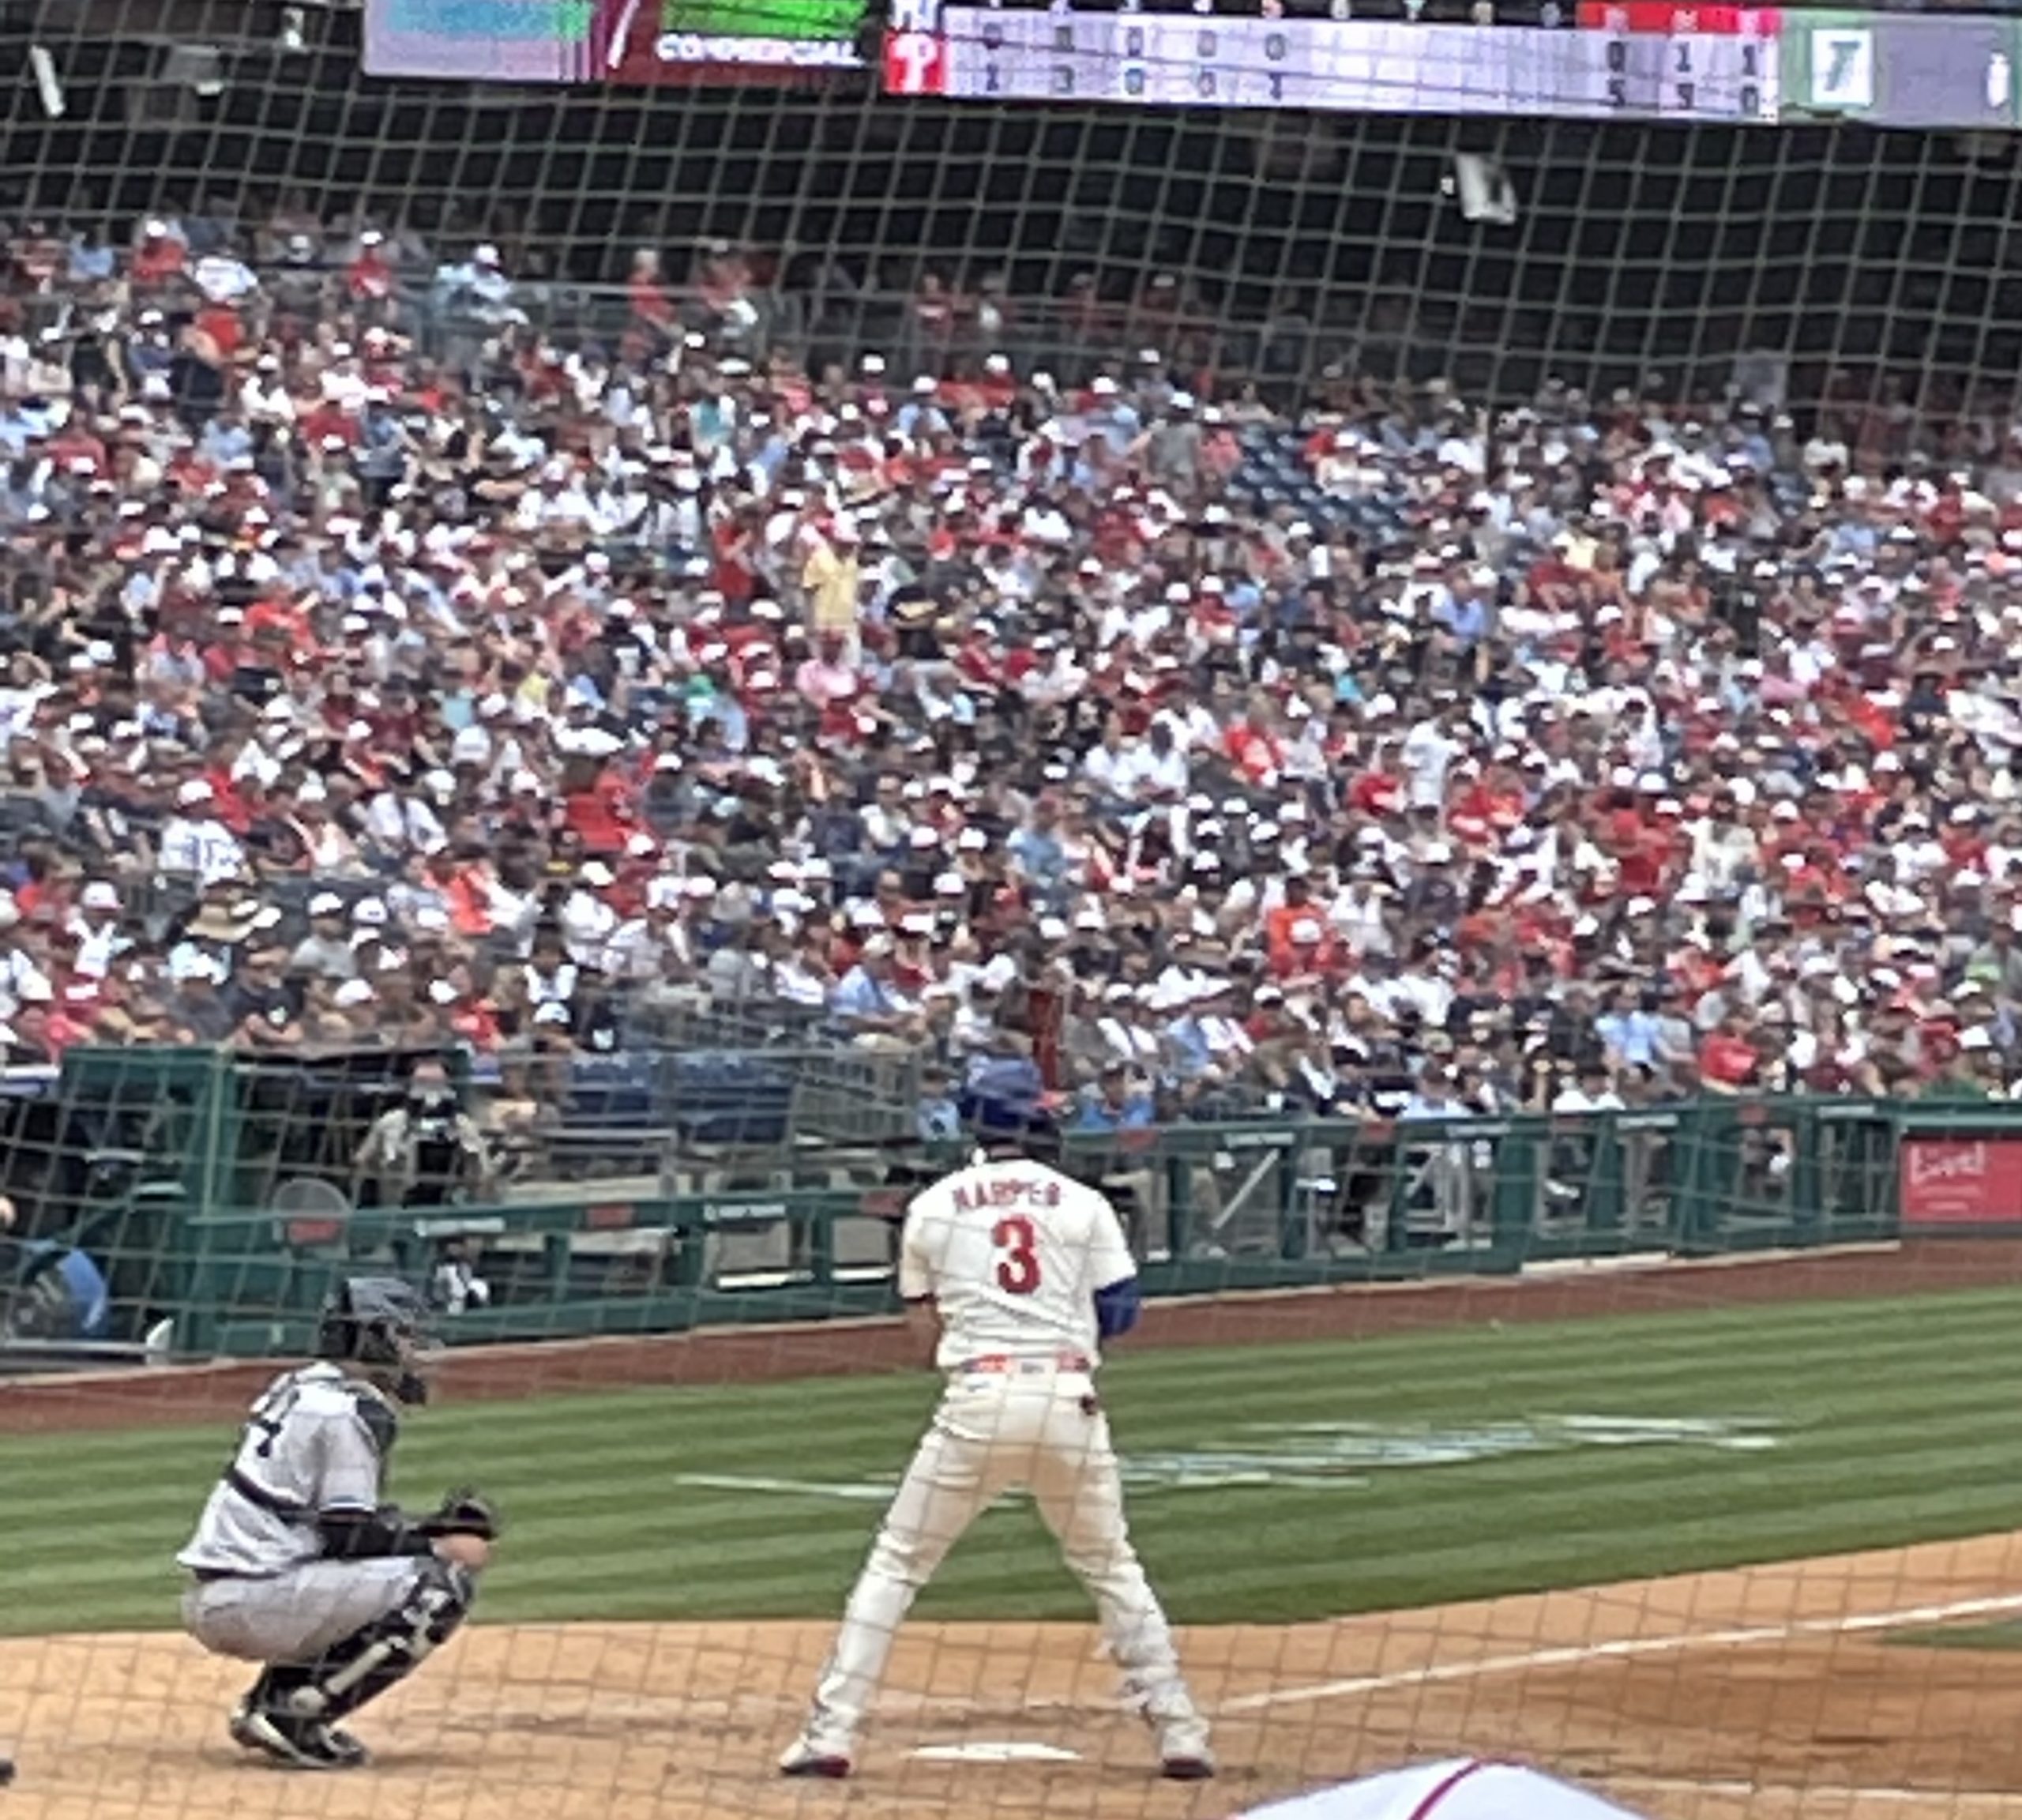 This is from 13 June, 2021. Bryce Harper at the time right fielder is up to bat. In. this game they played the New York Yankees. In this game they defeated the New York Yankees 7-0.